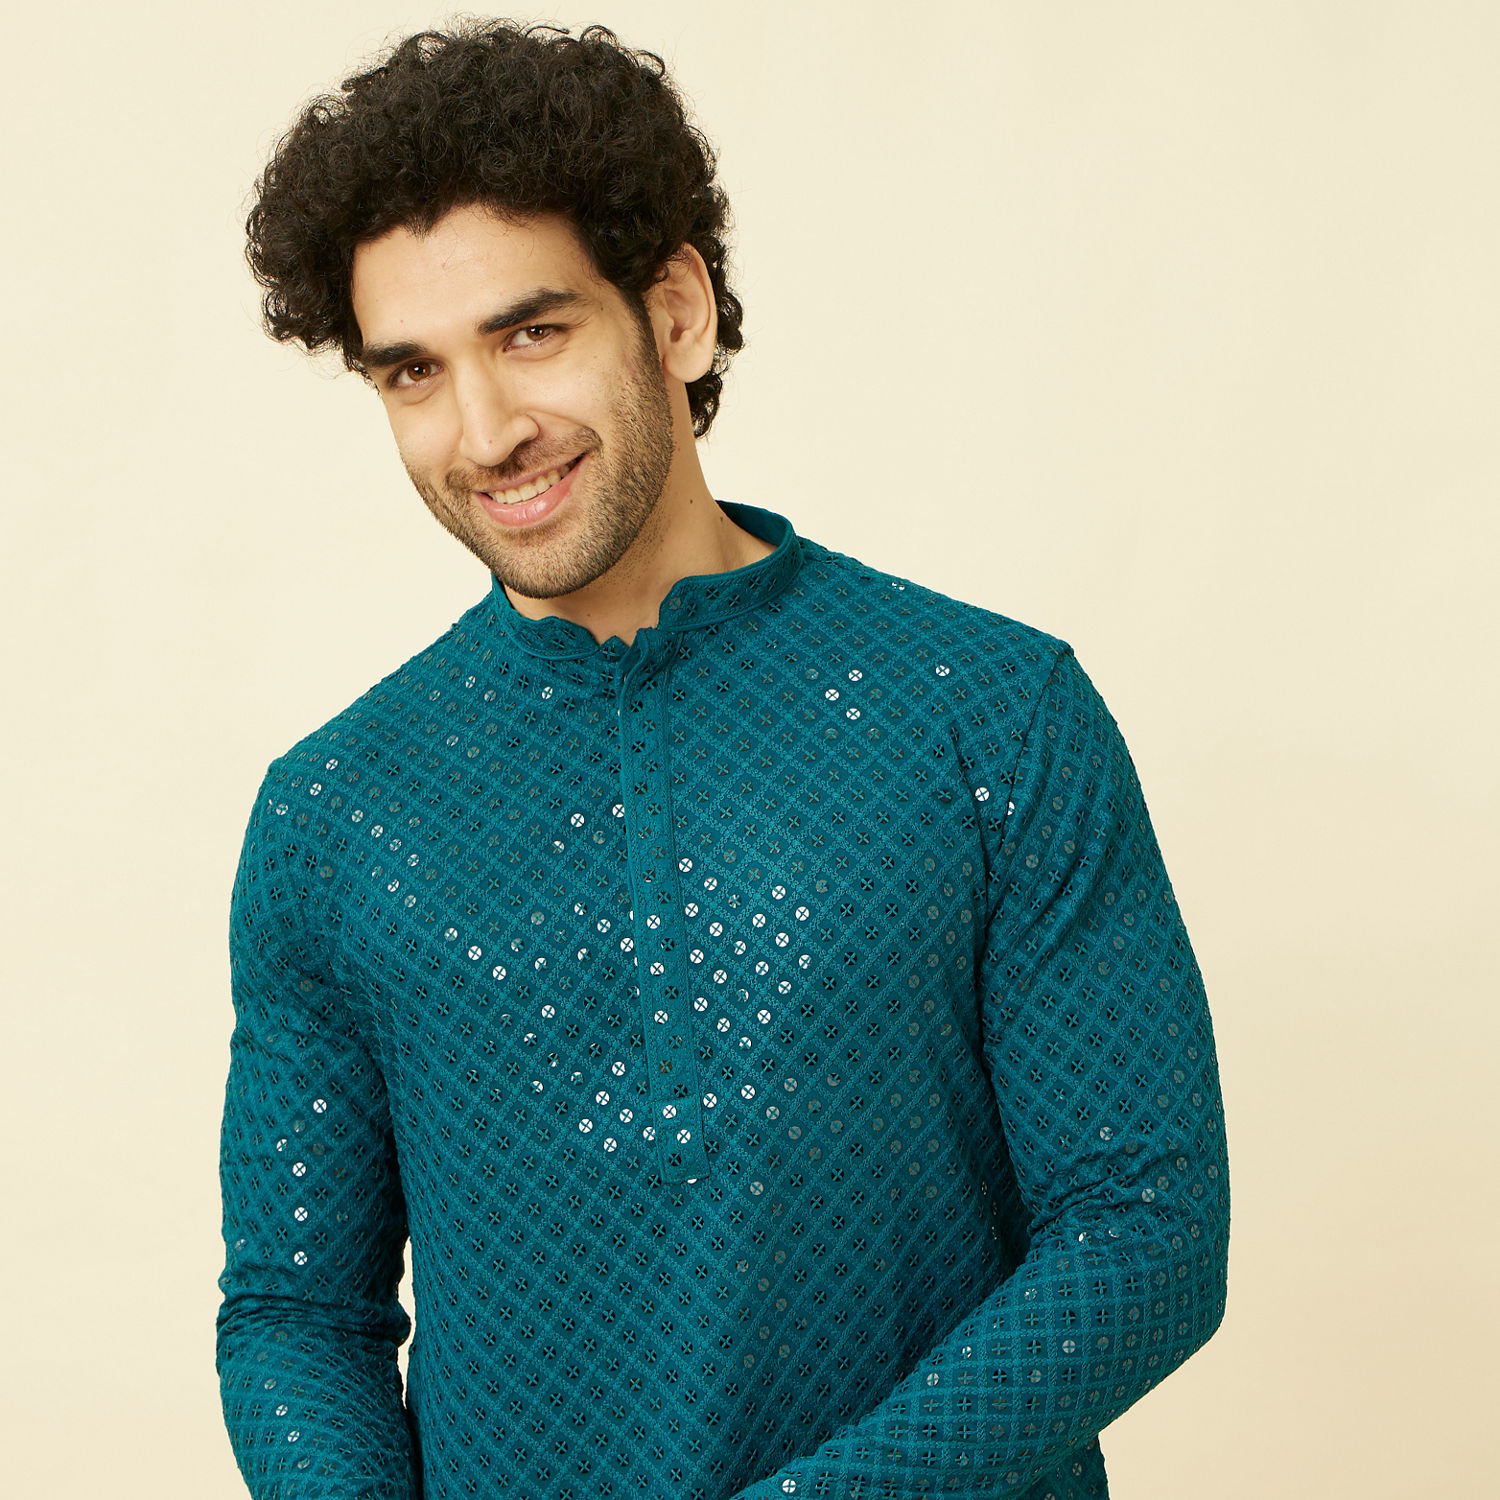 SAGAI men's wear - We call it winter-chic. The smart combination of  knitwear and shirt. | Facebook